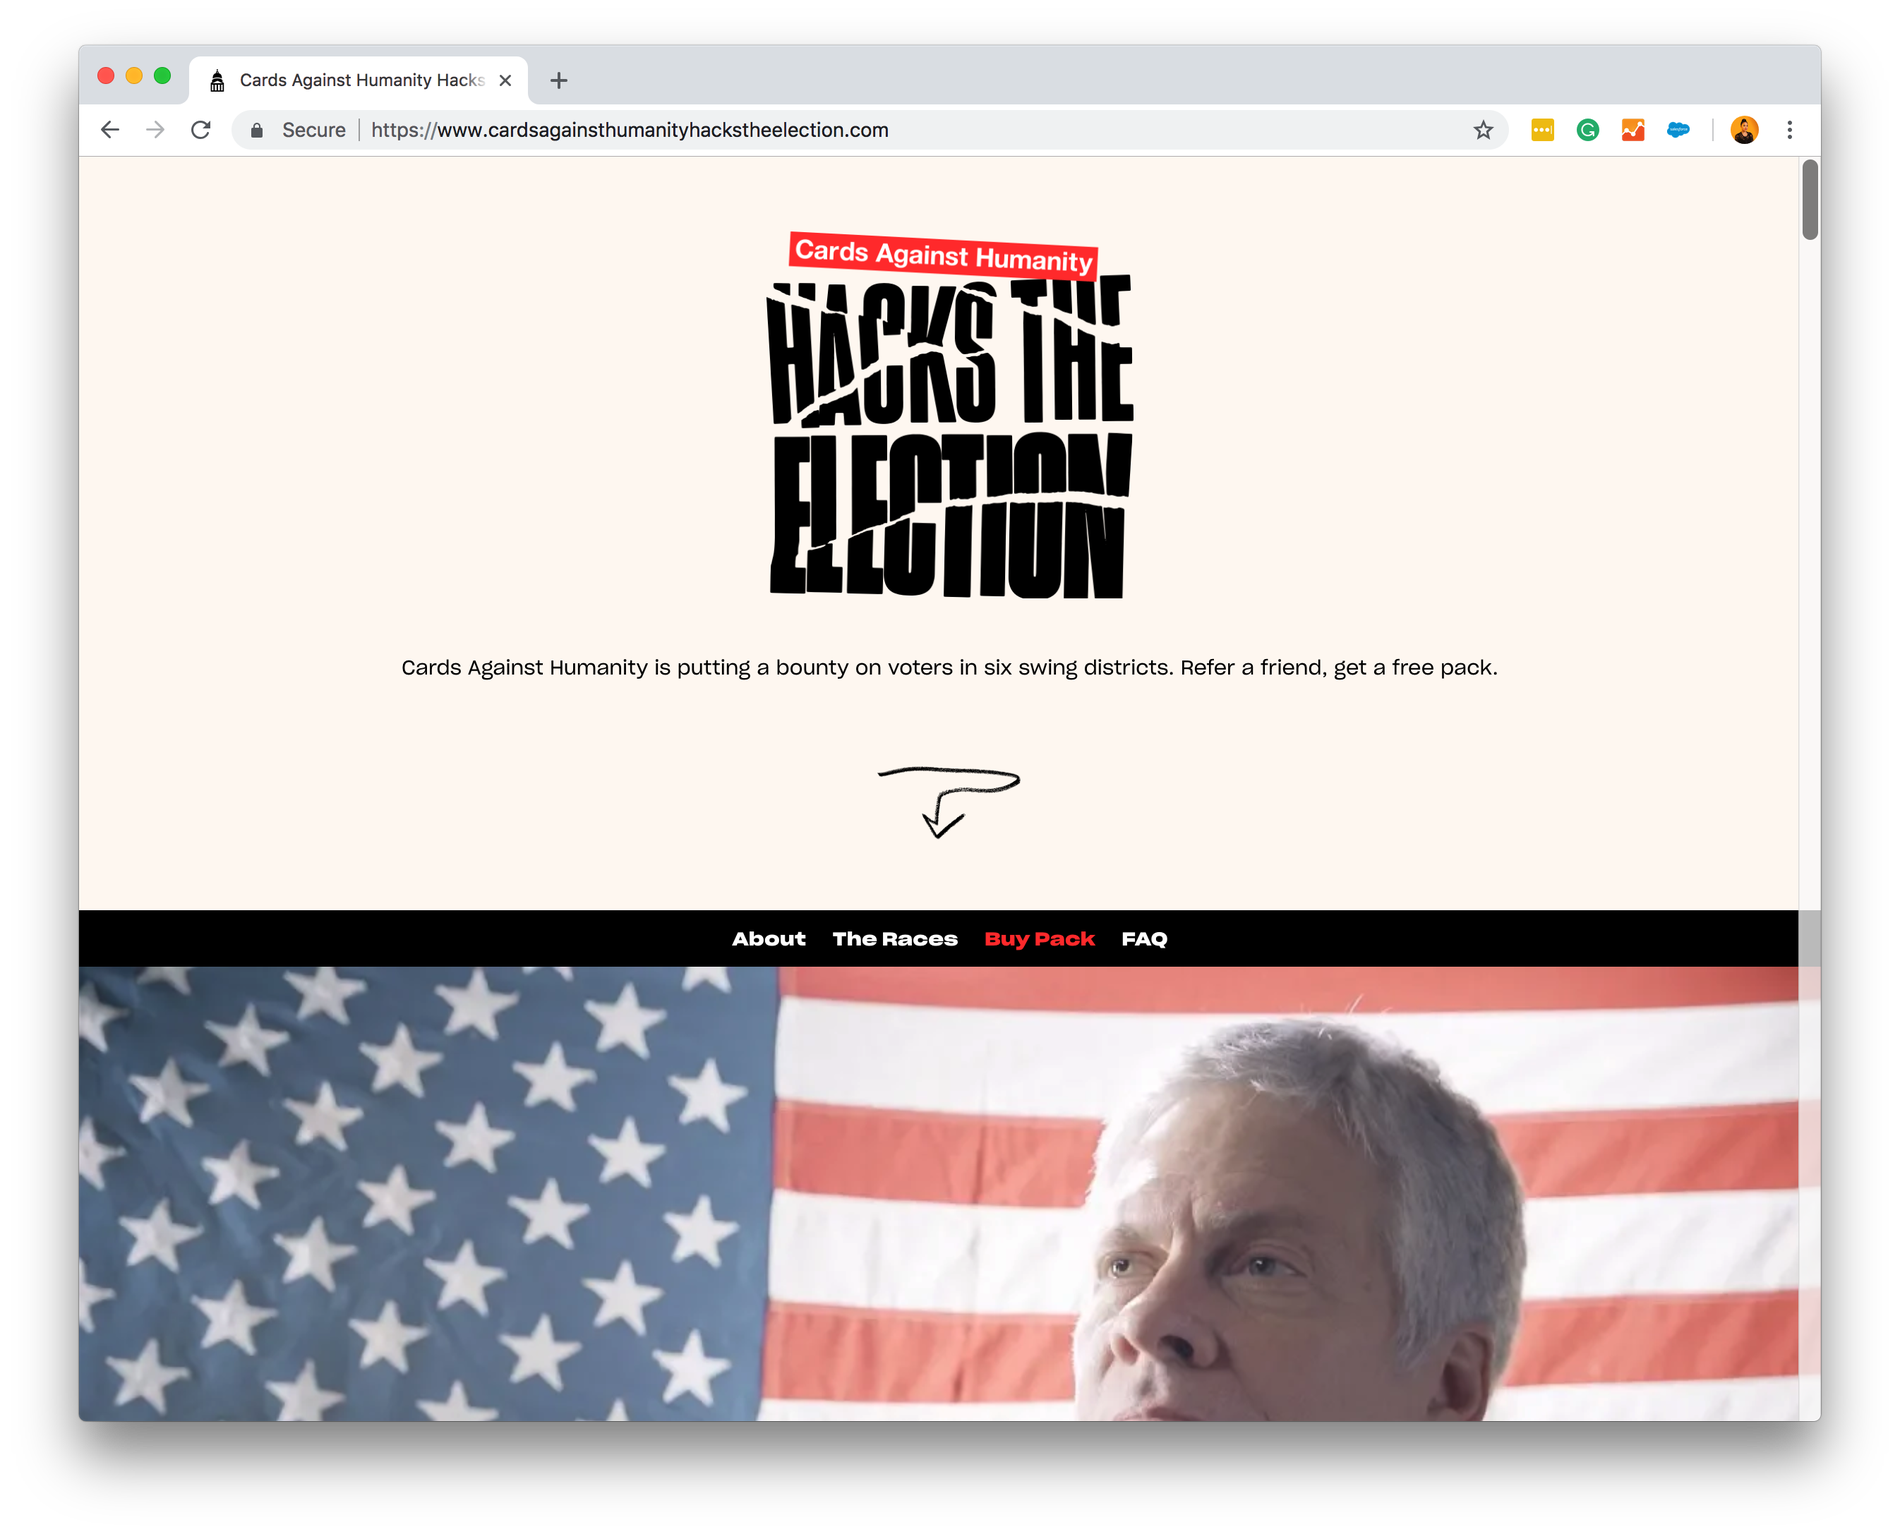 Sharp-Type-Cards-Against-Humanity-Hacks-Election-Web-91